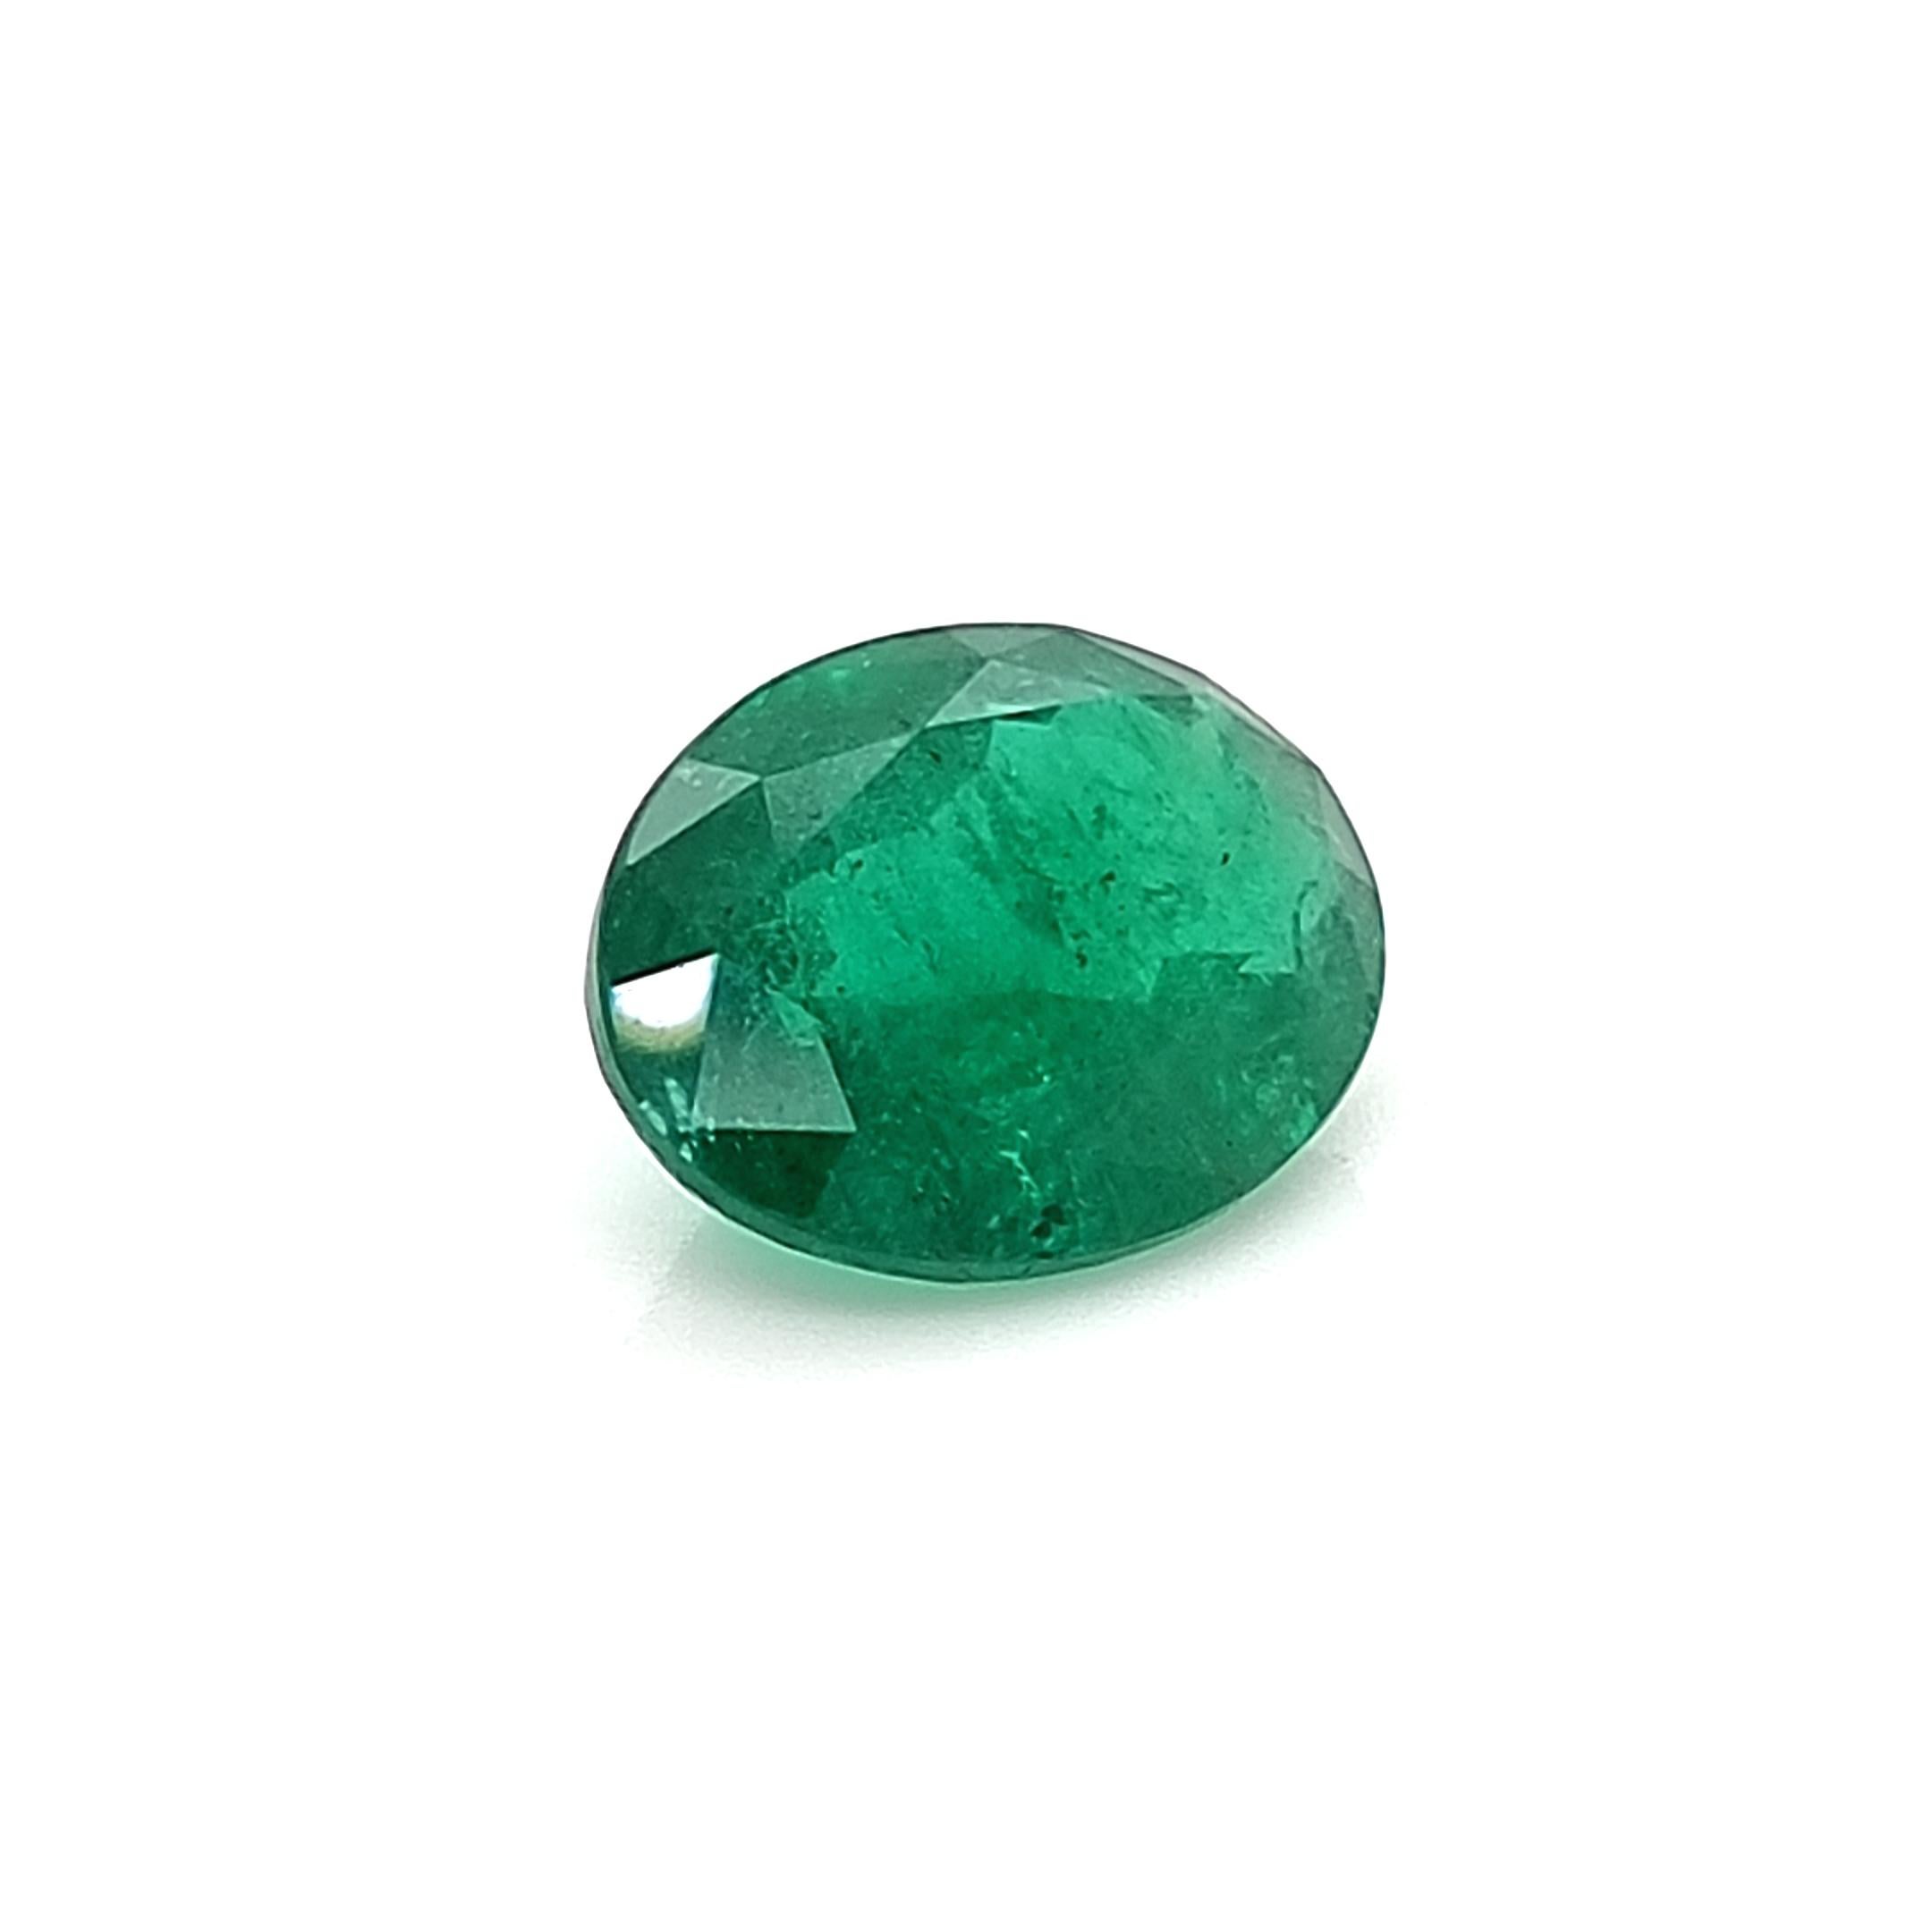 Oval emerald with minor treatment.

Zambian emerald.

15.87 x 12.21 x 6.77 mm 

7.97 carats

GFCO Certificate